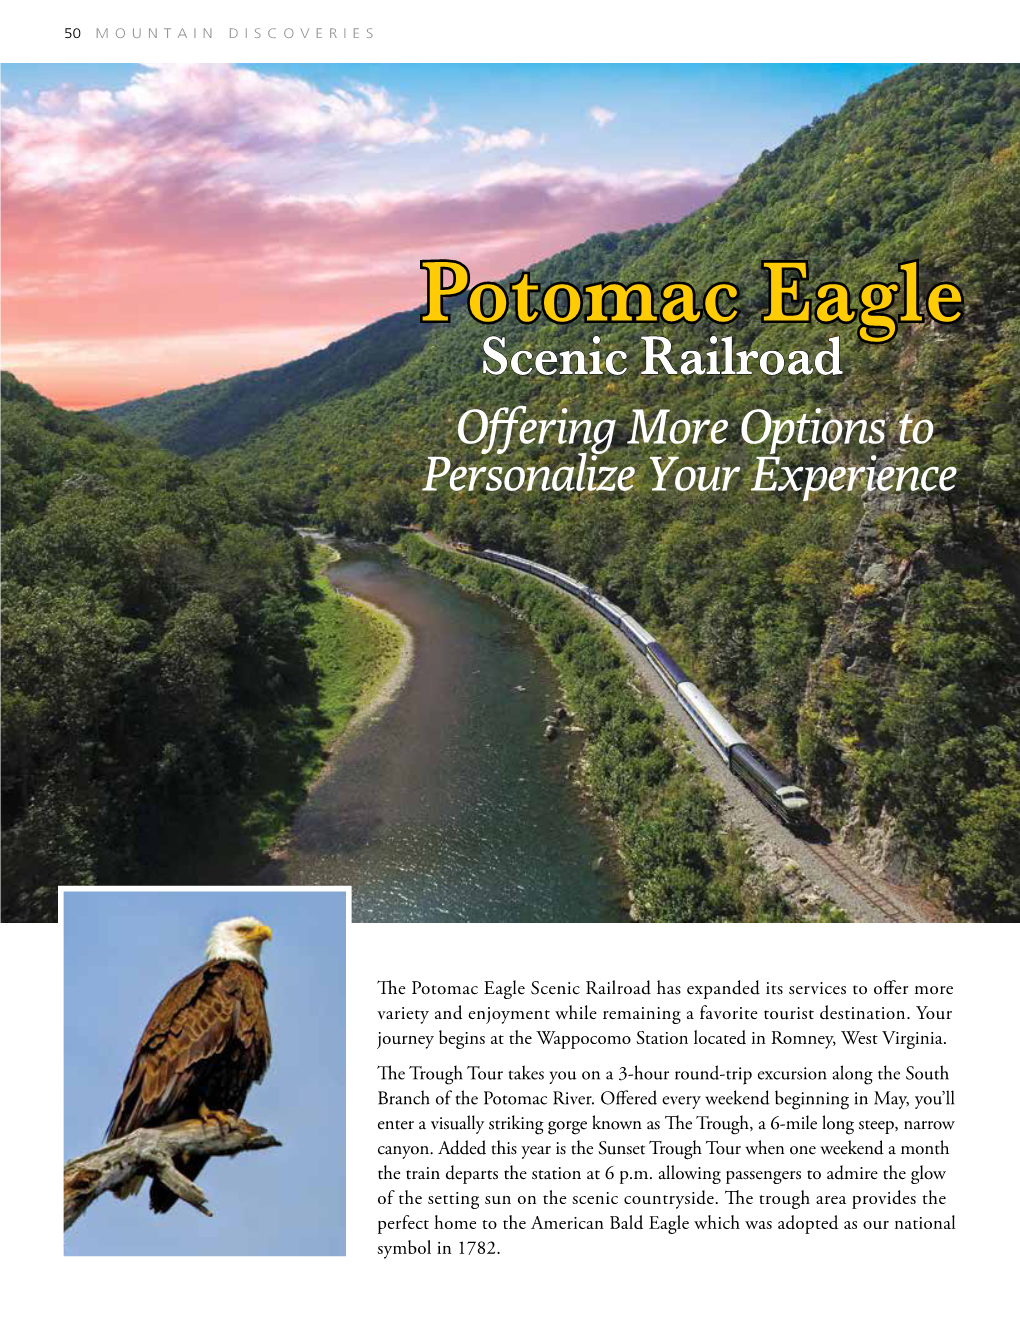 Potomac Eagle Scenic Railroad Offering More Options to Personalize Your Experience